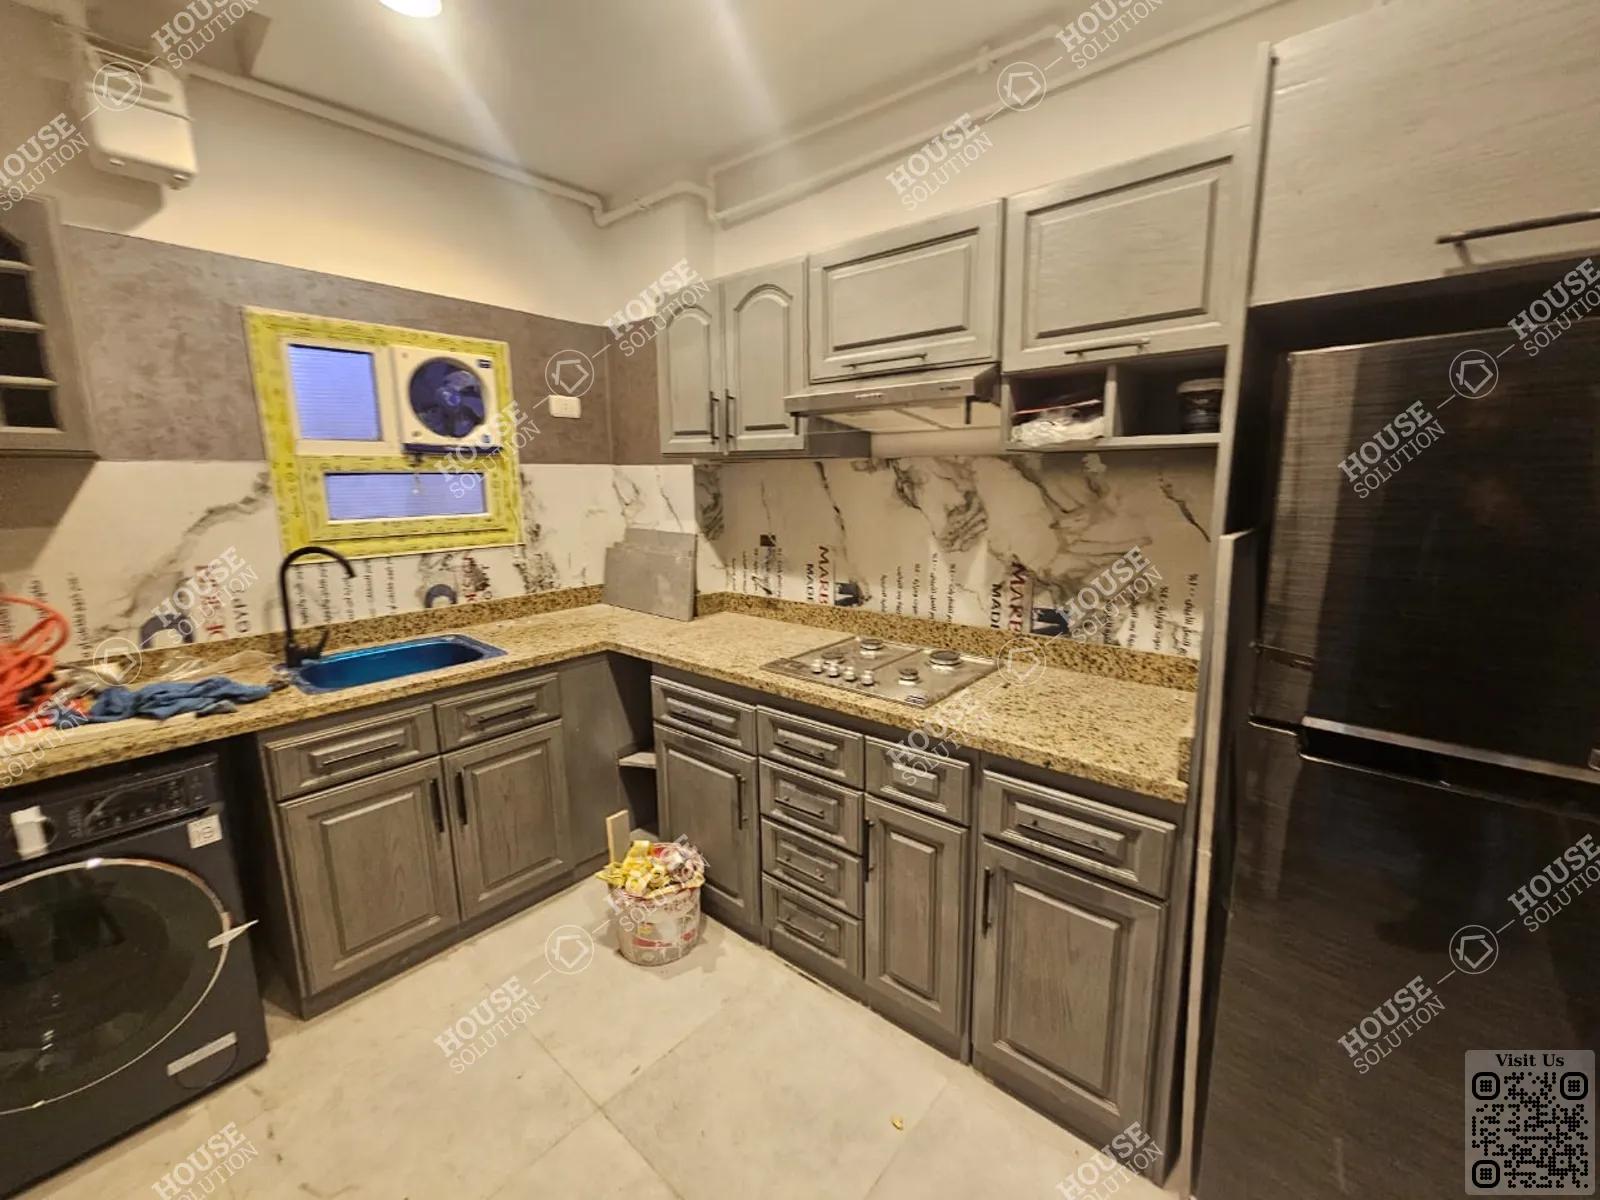 KITCHEN  @ Apartments For Rent In Maadi Maadi Degla Area: 110 m² consists of 2 Bedrooms 1 Bathrooms Modern furnished 5 stars #5853-1